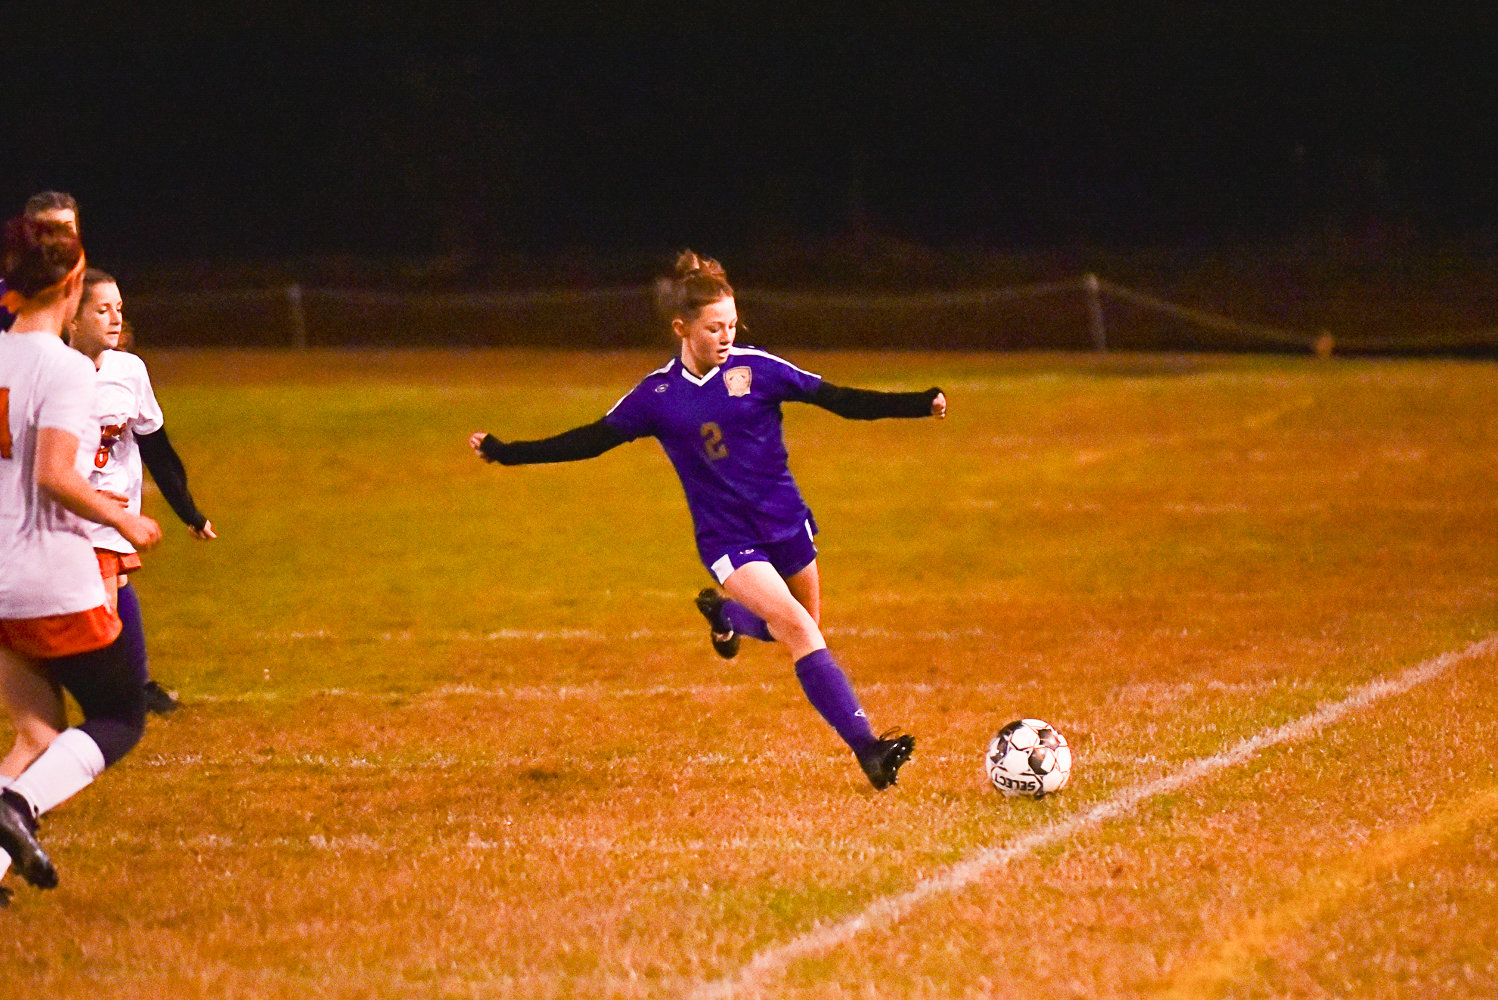 Jaelyn Auman clears the ball down the line during the first half of Onalaska's 6-0 loss to Kalama on Oct. 26.